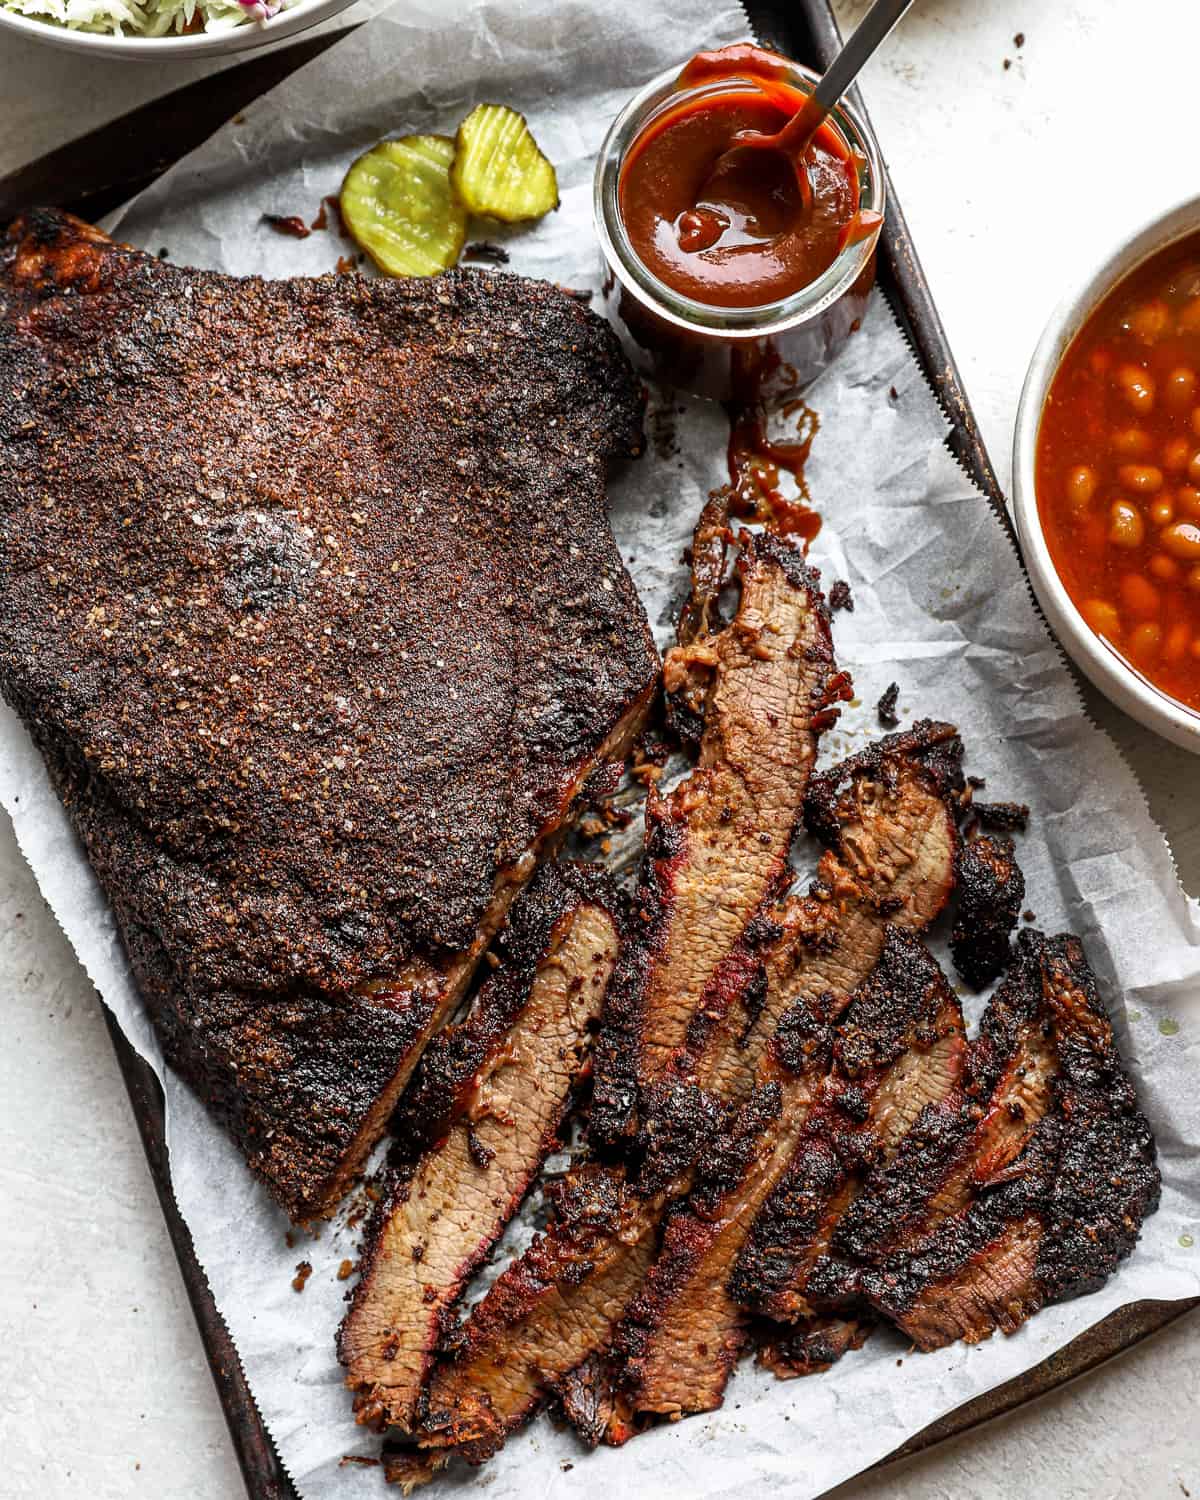 a smoked brisket partially cut into thin slices, on a parchment-lined tray.